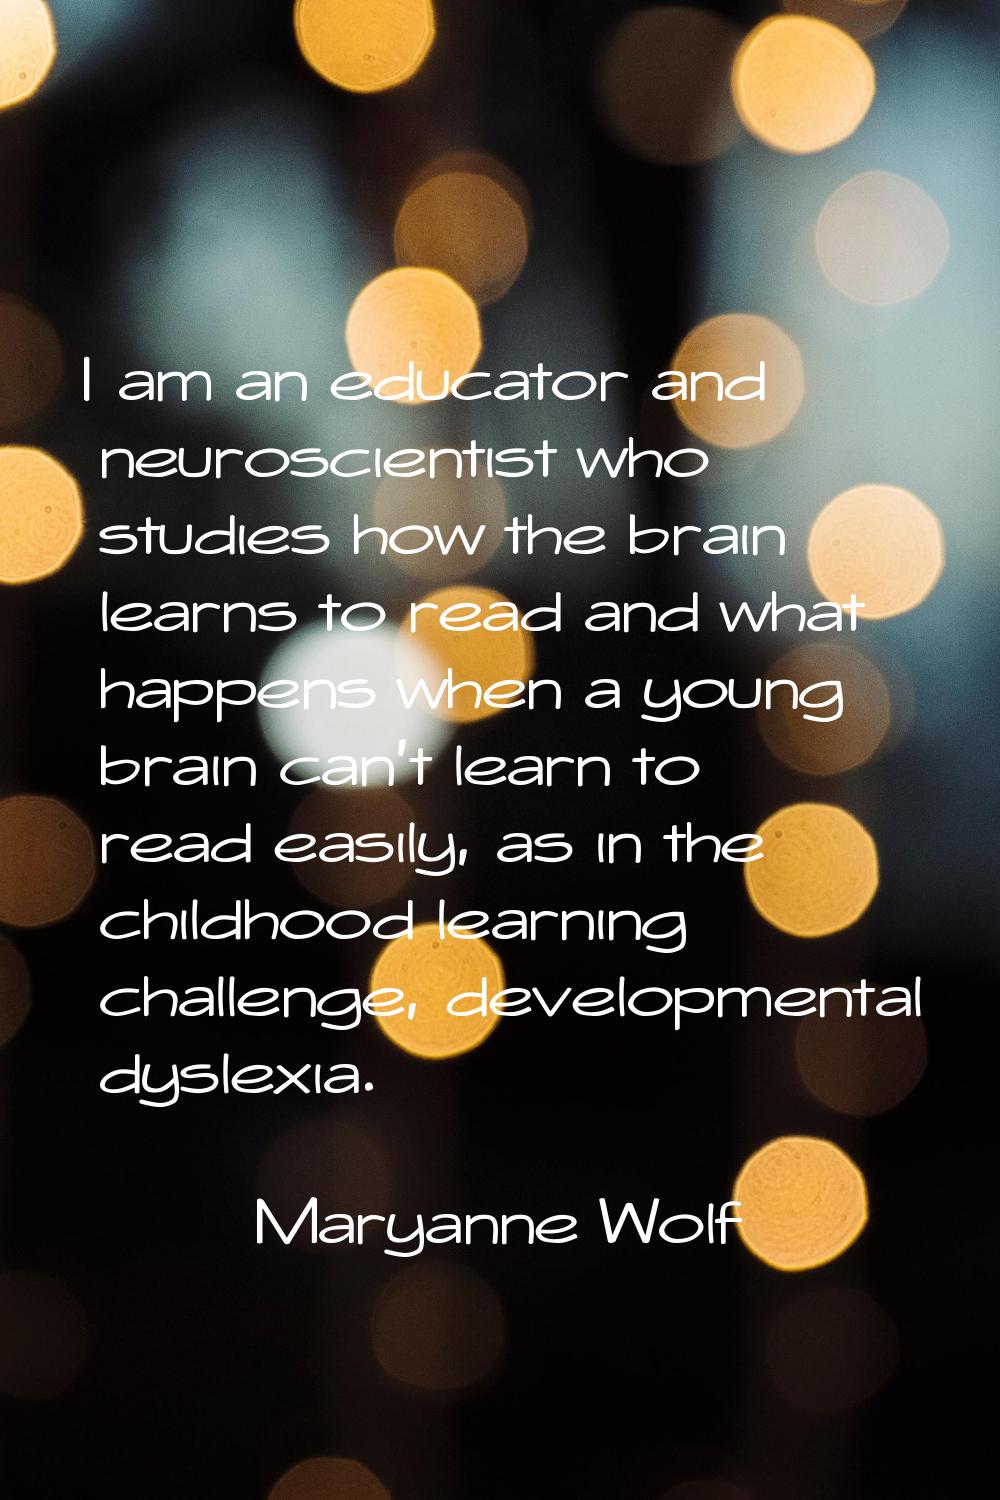 I am an educator and neuroscientist who studies how the brain learns to read and what happens when 